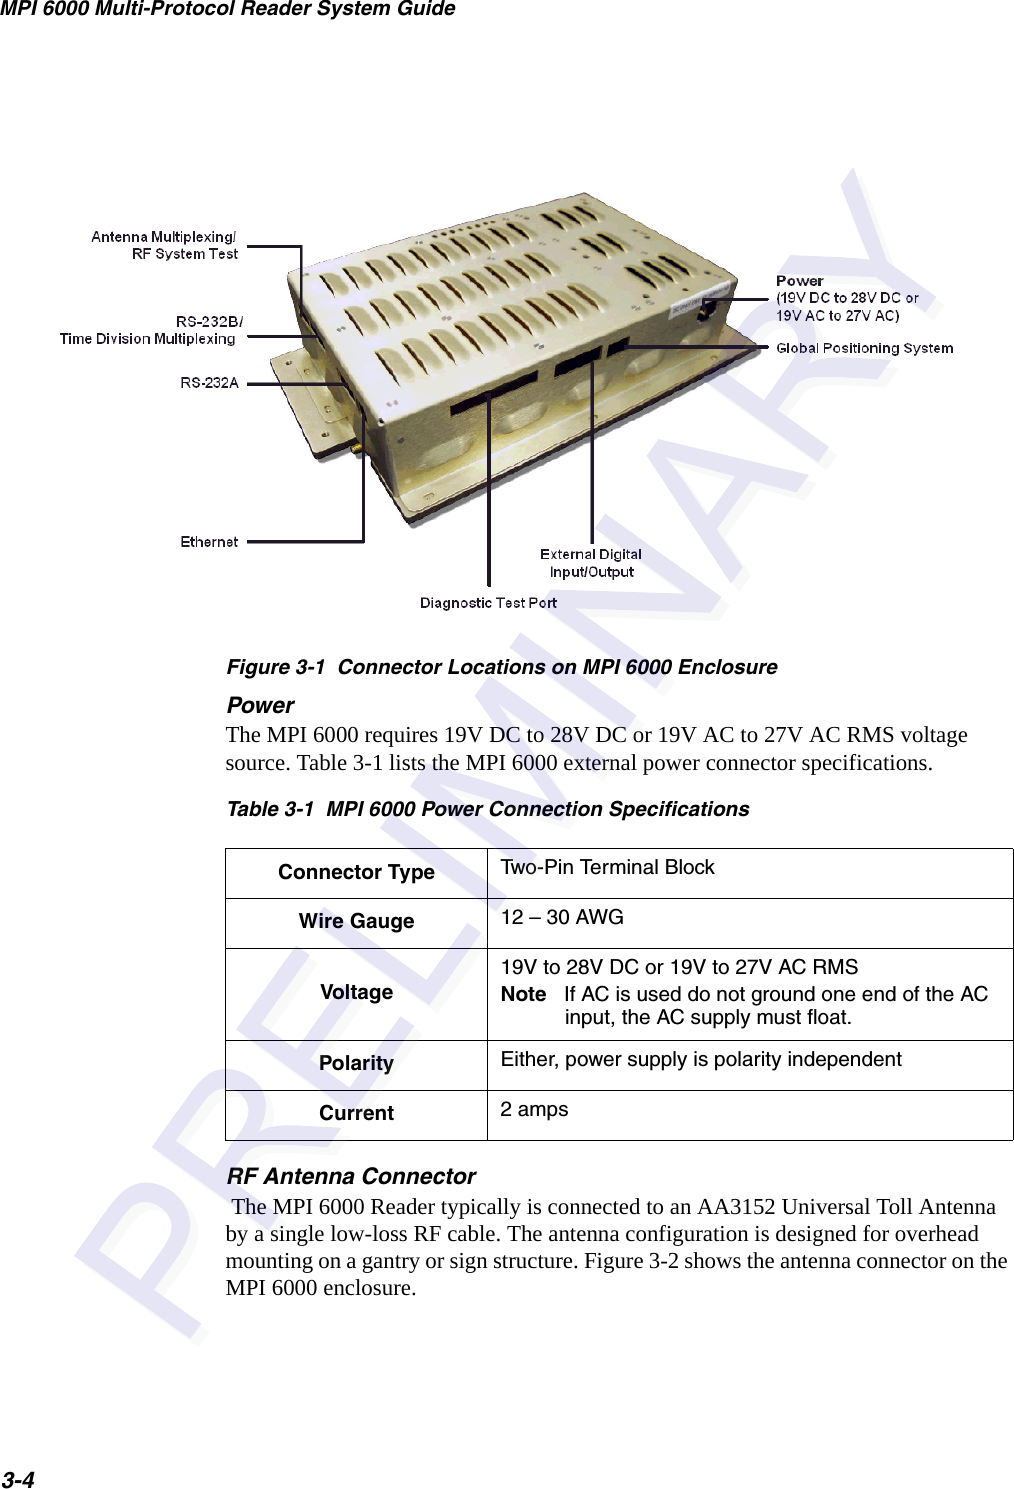 MPI 6000 Multi-Protocol Reader System Guide3-4Figure 3-1  Connector Locations on MPI 6000 EnclosurePowerThe MPI 6000 requires 19V DC to 28V DC or 19V AC to 27V AC RMS voltage source. Table 3-1 lists the MPI 6000 external power connector specifications.RF Antenna Connector The MPI 6000 Reader typically is connected to an AA3152 Universal Toll Antenna by a single low-loss RF cable. The antenna configuration is designed for overhead mounting on a gantry or sign structure. Figure 3-2 shows the antenna connector on the MPI 6000 enclosure.Table 3-1  MPI 6000 Power Connection SpecificationsConnector Type Two-Pin Terminal Block Wire Gauge 12 – 30 AWGVoltage19V to 28V DC or 19V to 27V AC RMSNote   If AC is used do not ground one end of the AC input, the AC supply must float.Polarity Either, power supply is polarity independentCurrent 2 amps